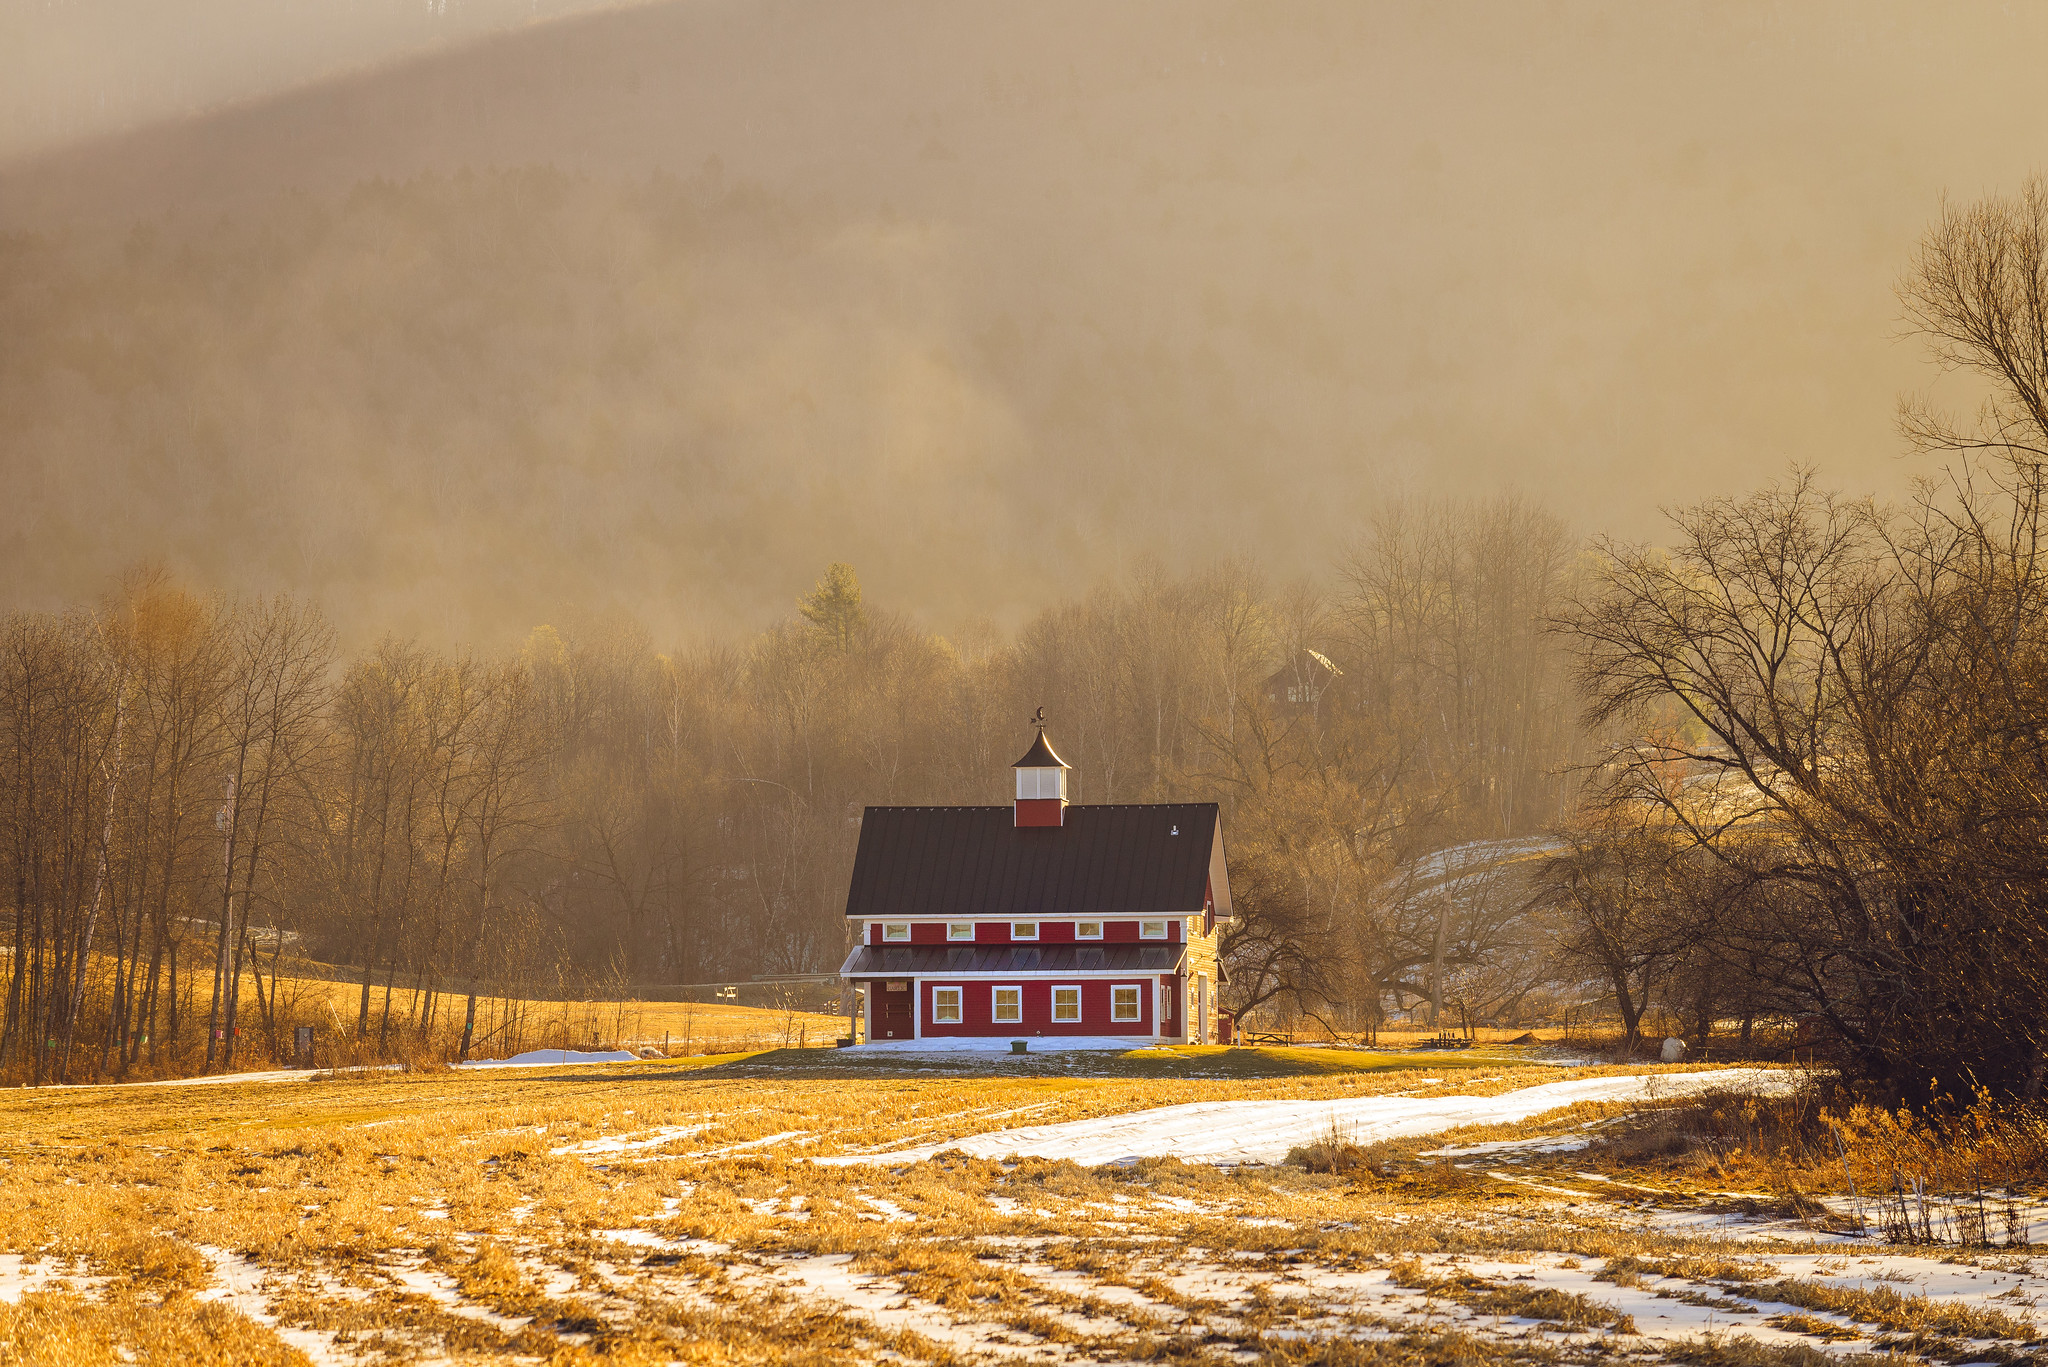 A large red barn sits in a golden field streaked with just a bit of snow